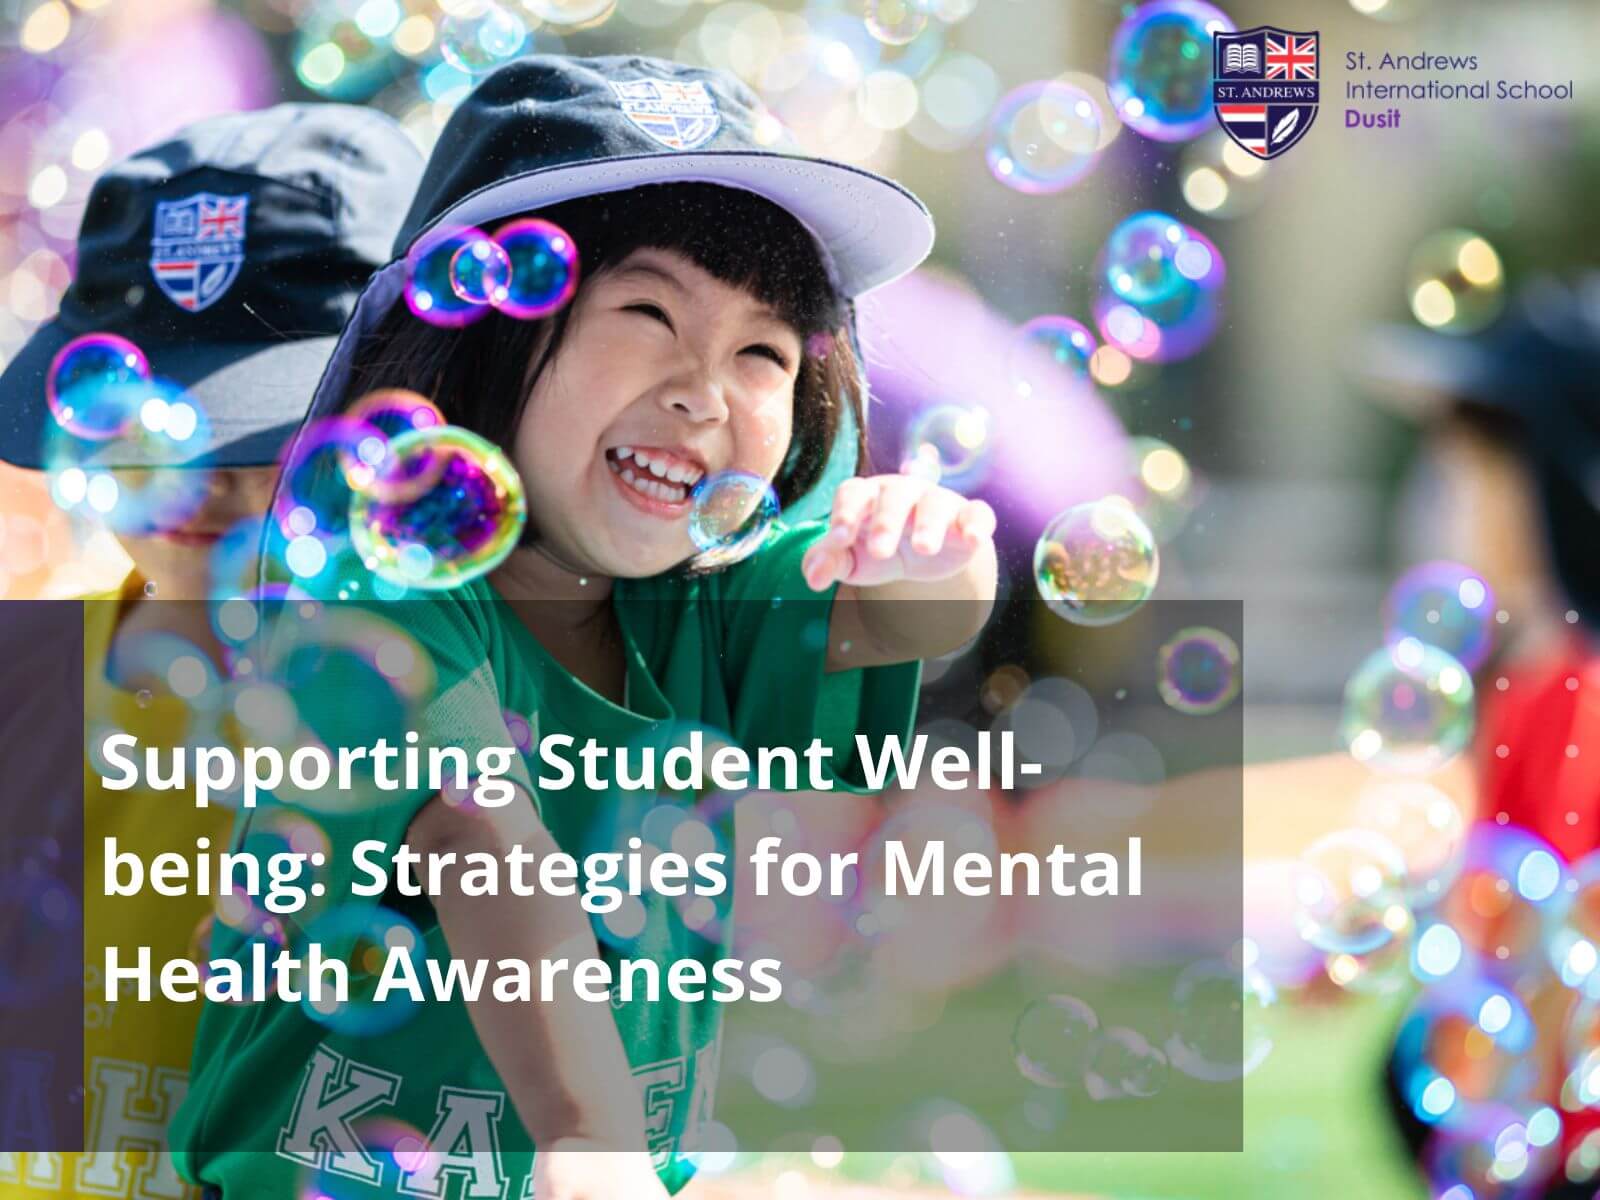 Supporting Student Well-being Strategies for Mental Health Awareness